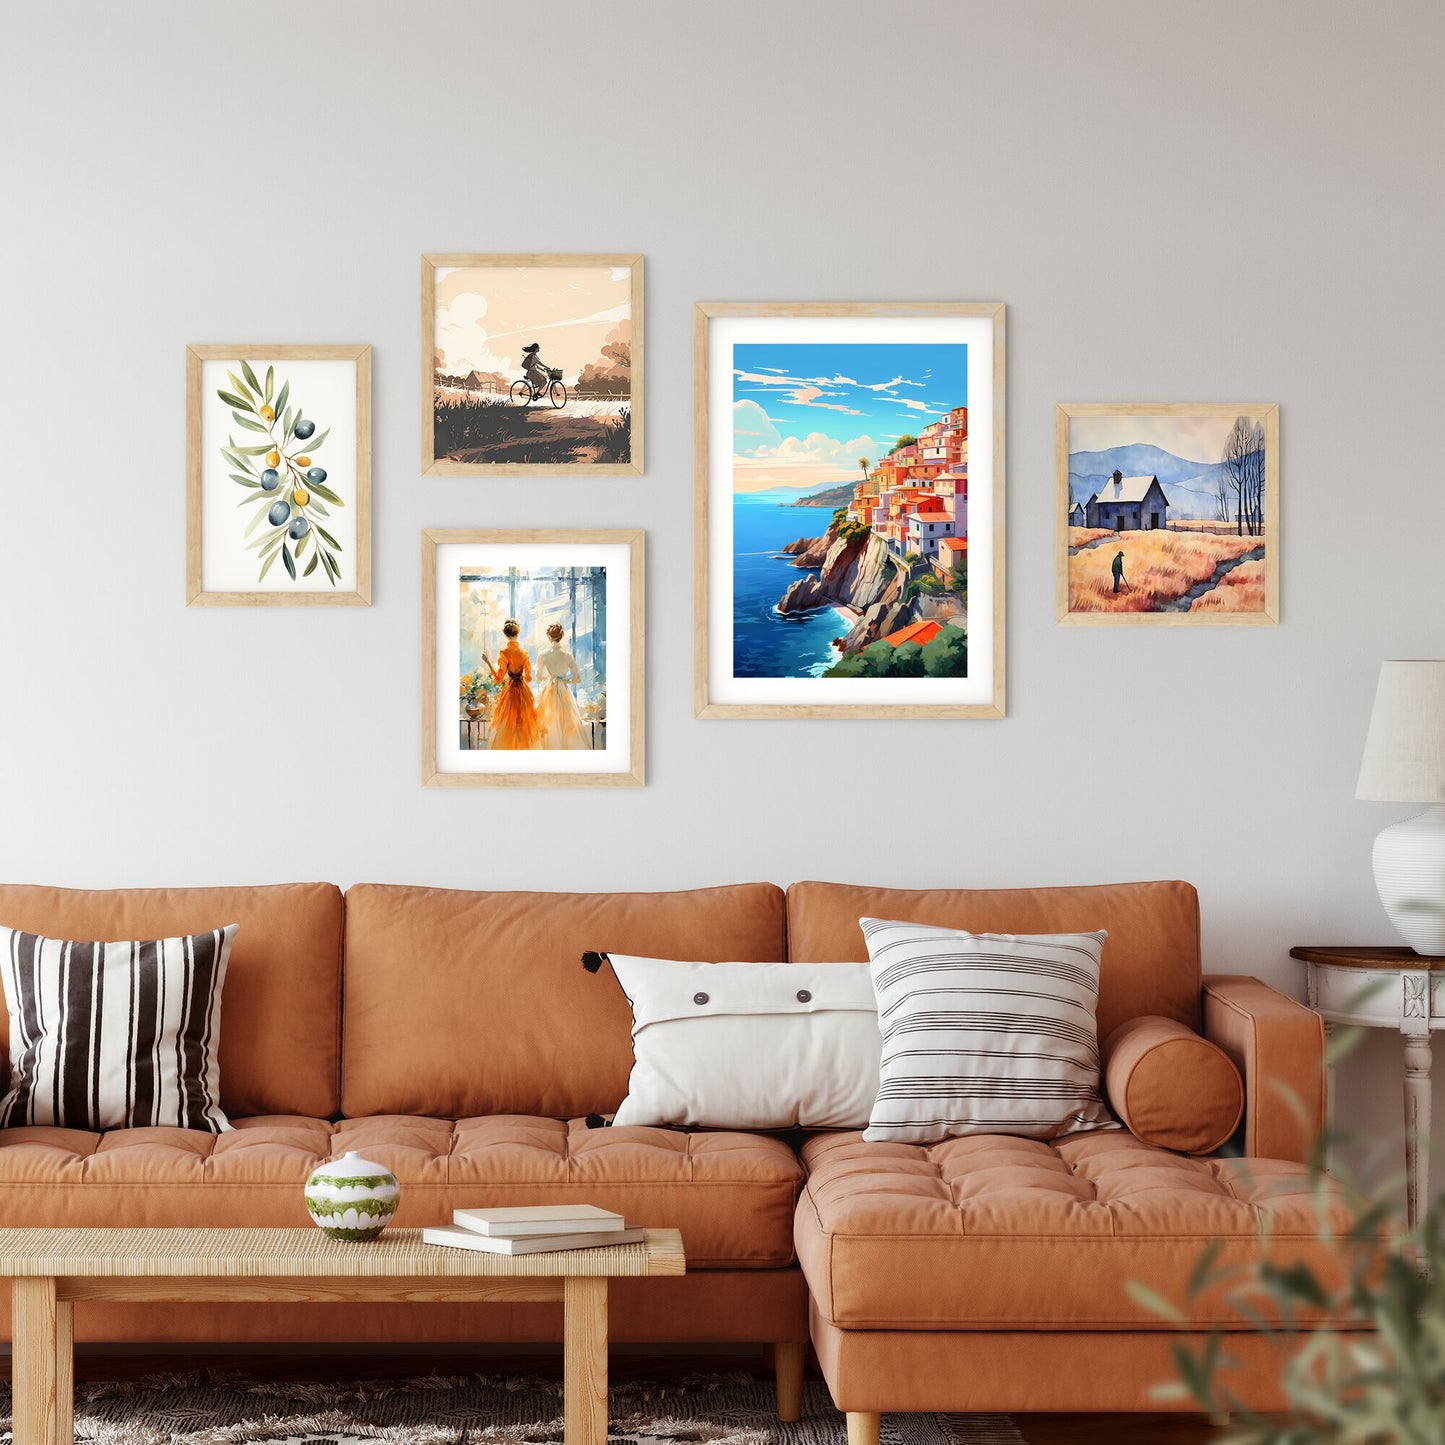 Colorful Buildings On A Cliff Above The Water Art Print Default Title